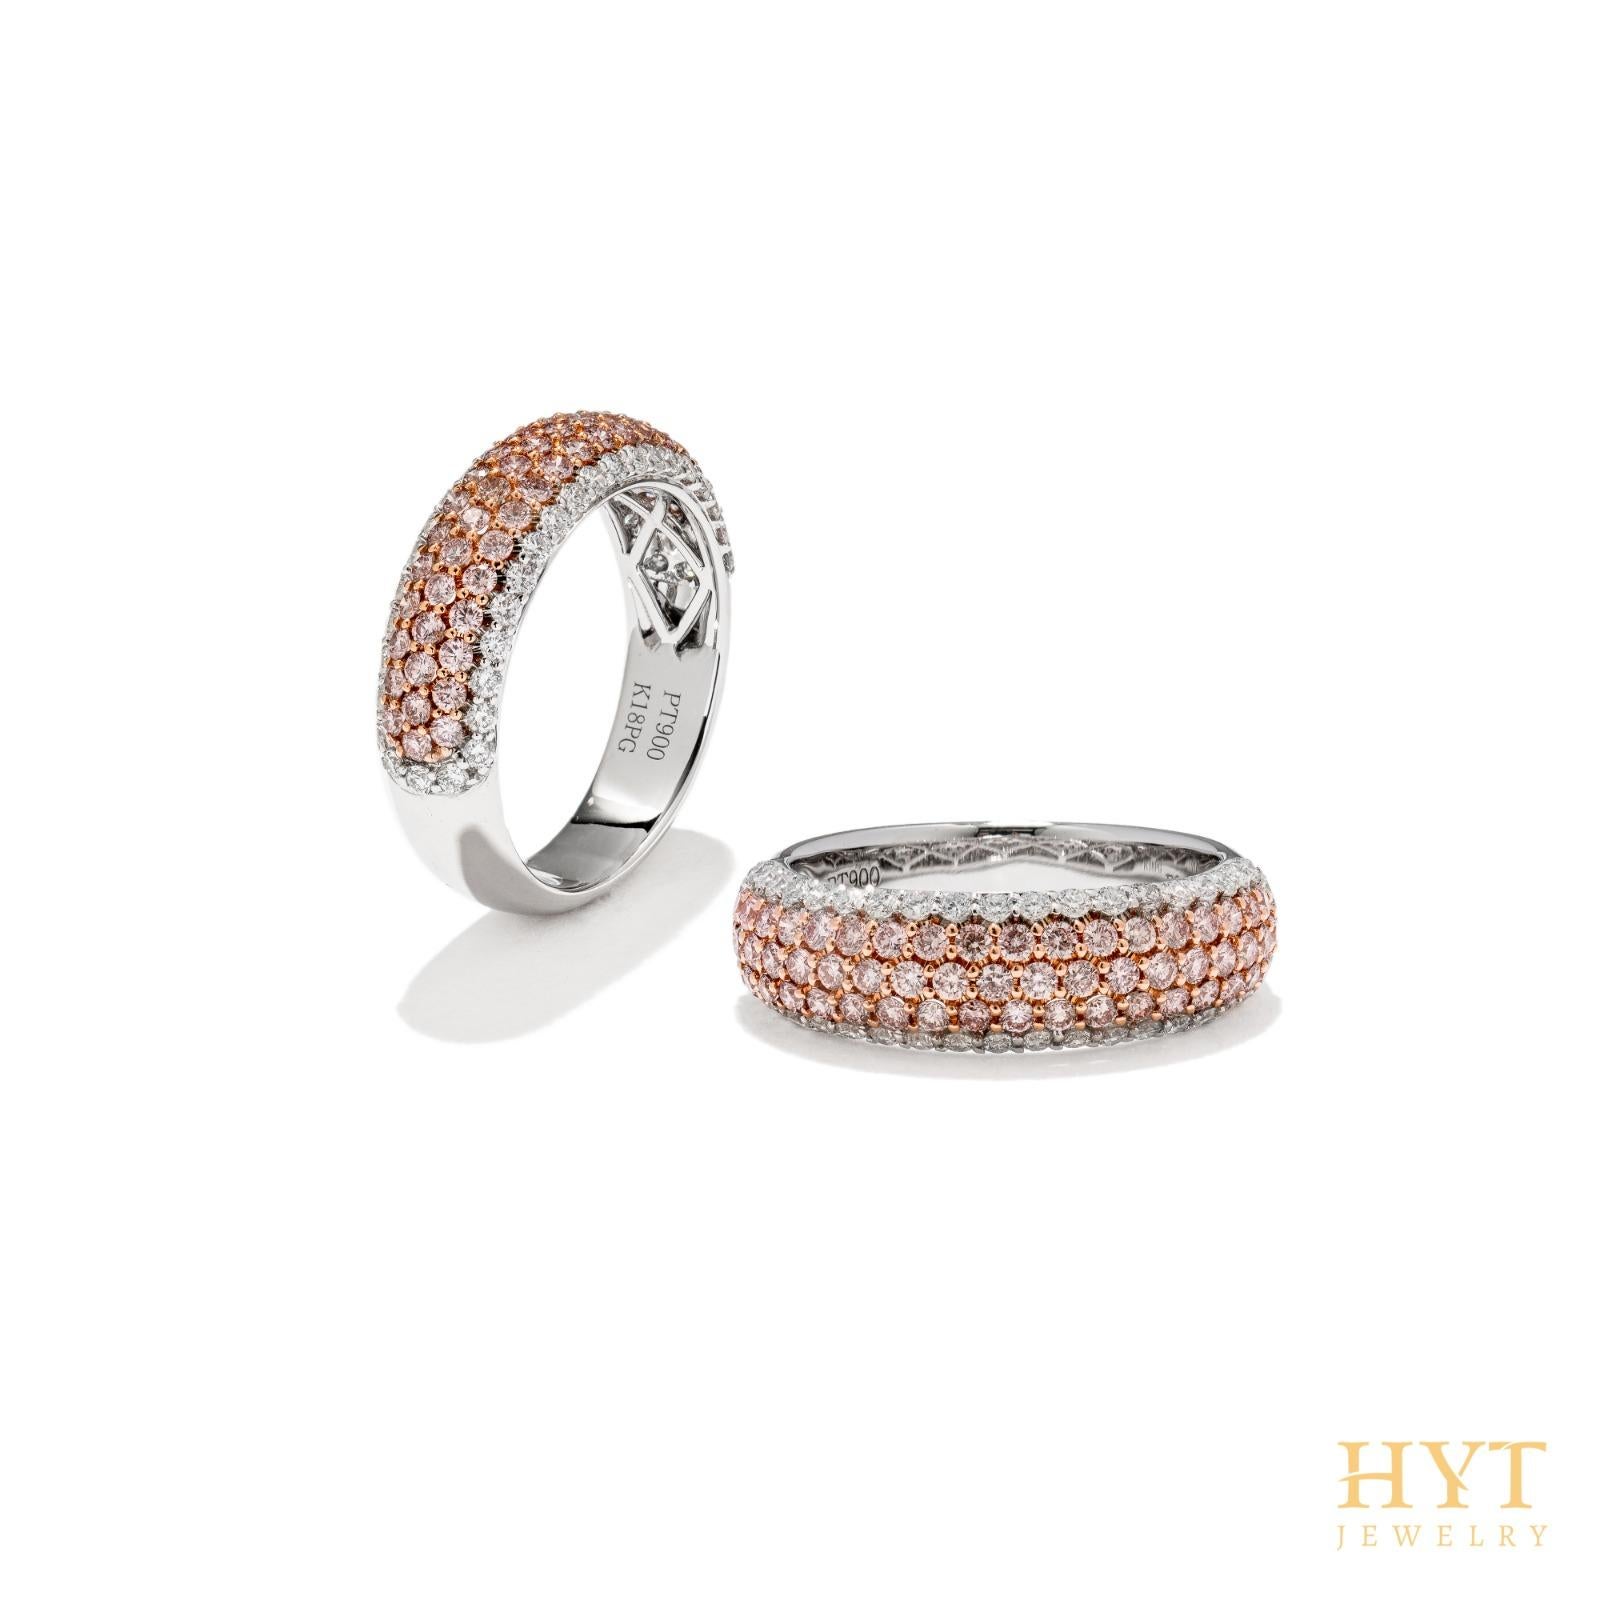 This delicate ring band features a lustrous natural Pink Diamonds at the forefront of its design. The spectacular hues of the pink diamonds are perfectly accentuated by the PT900 platinum and 18 Karat pink gold setting and elegant white diamond